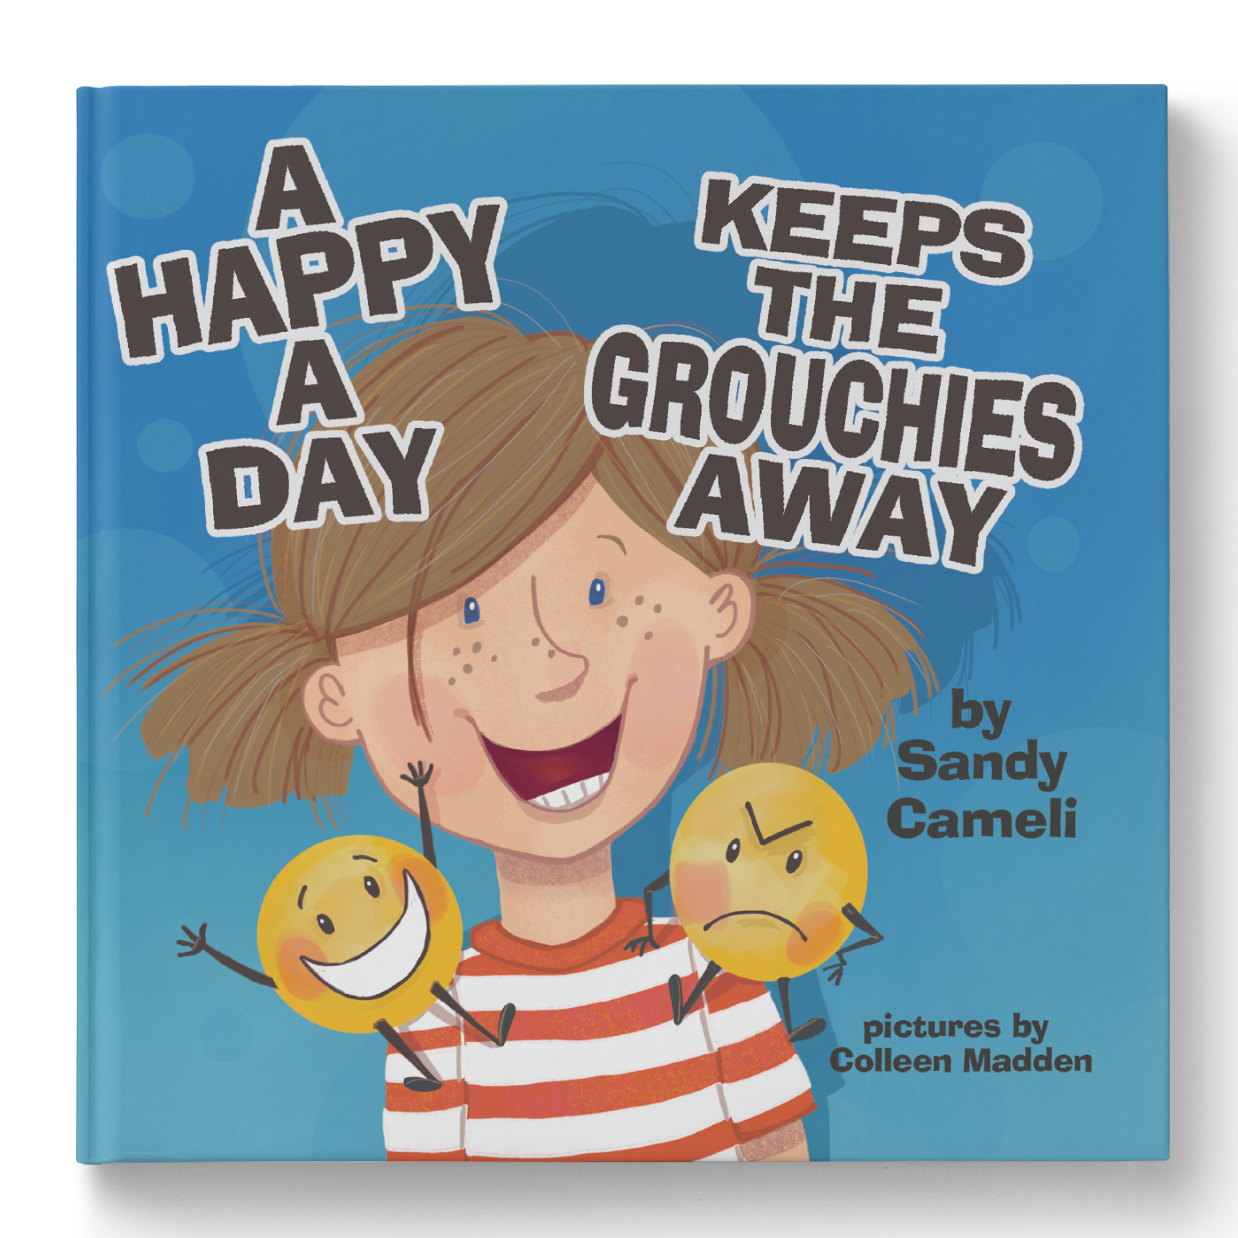 A Happy a Day Keeps the Grouchies Away!